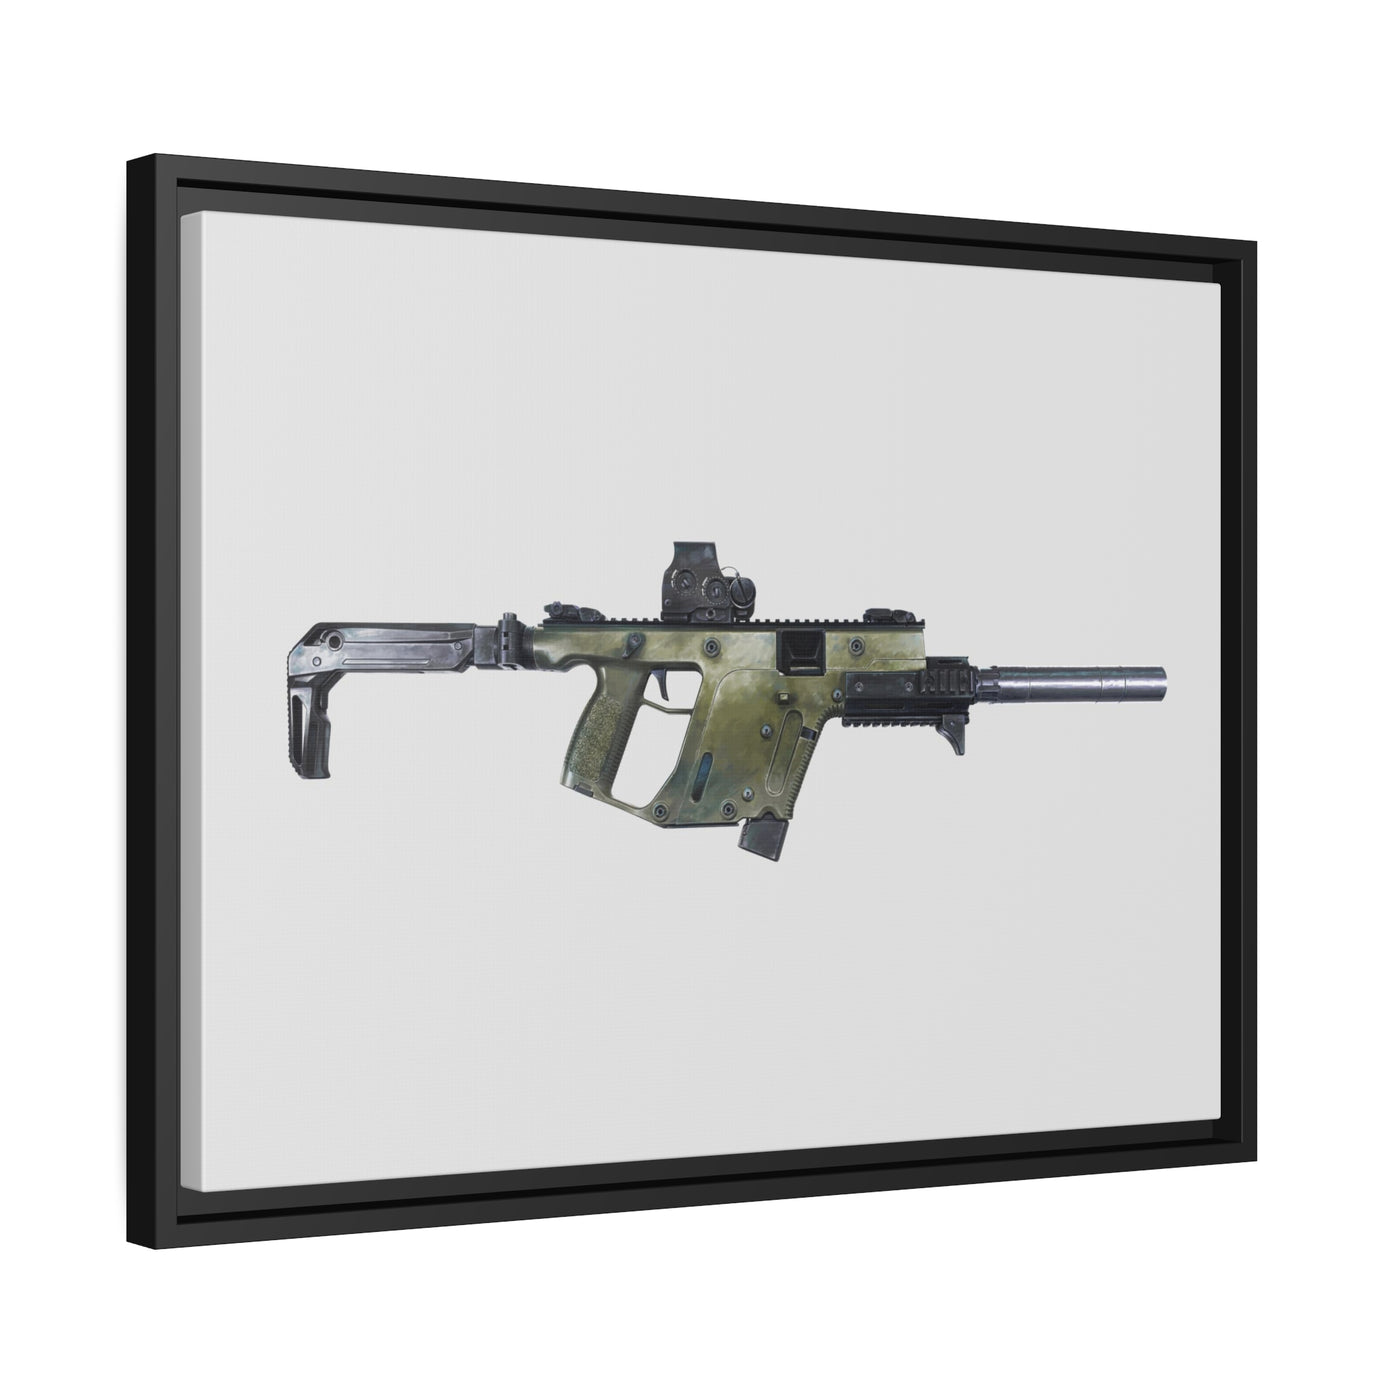 The Vindicator - Suppressed SMG Painting - Just The Piece - Black Framed Wrapped Canvas - Value Collection